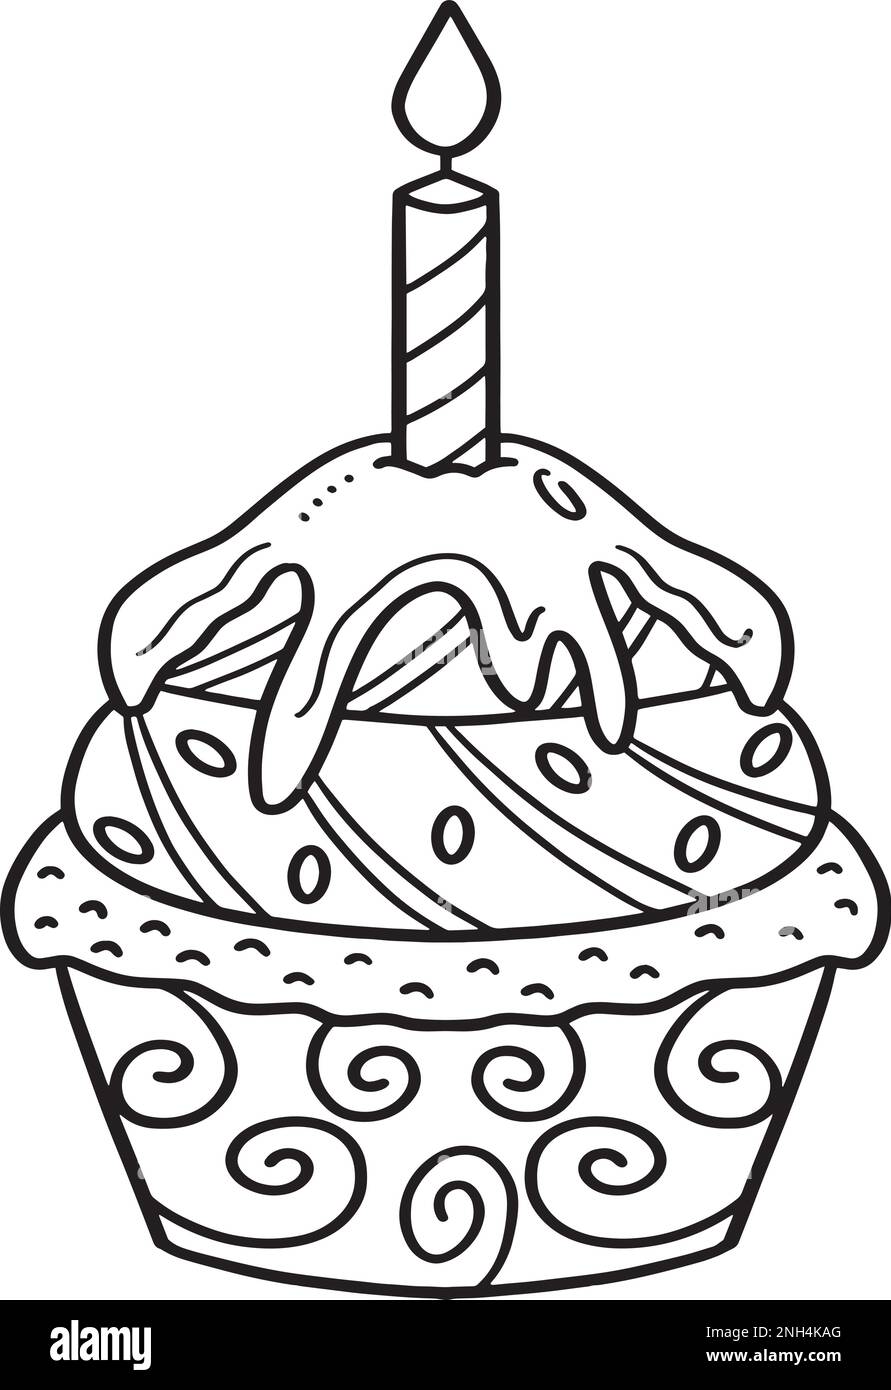 Birthday Cupcake Isolated Coloring Page for Kids Stock Vector Image ...